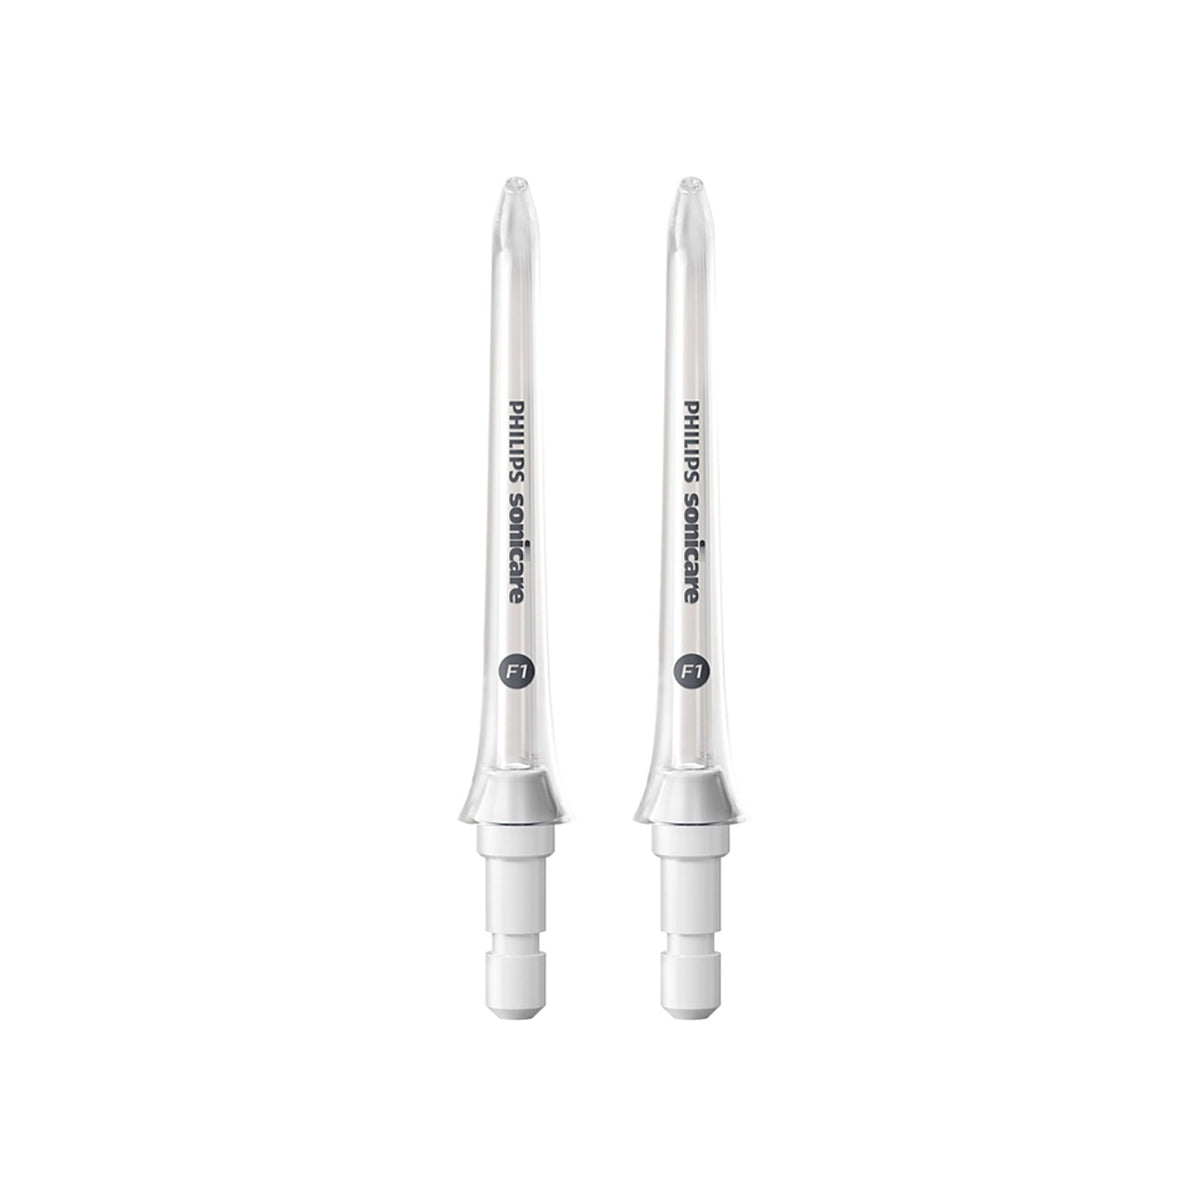 Philips HX3042/00 Sonicare F1 Standard Oral Irrigator Nozzle Twin Pack for Philips Power Flosser